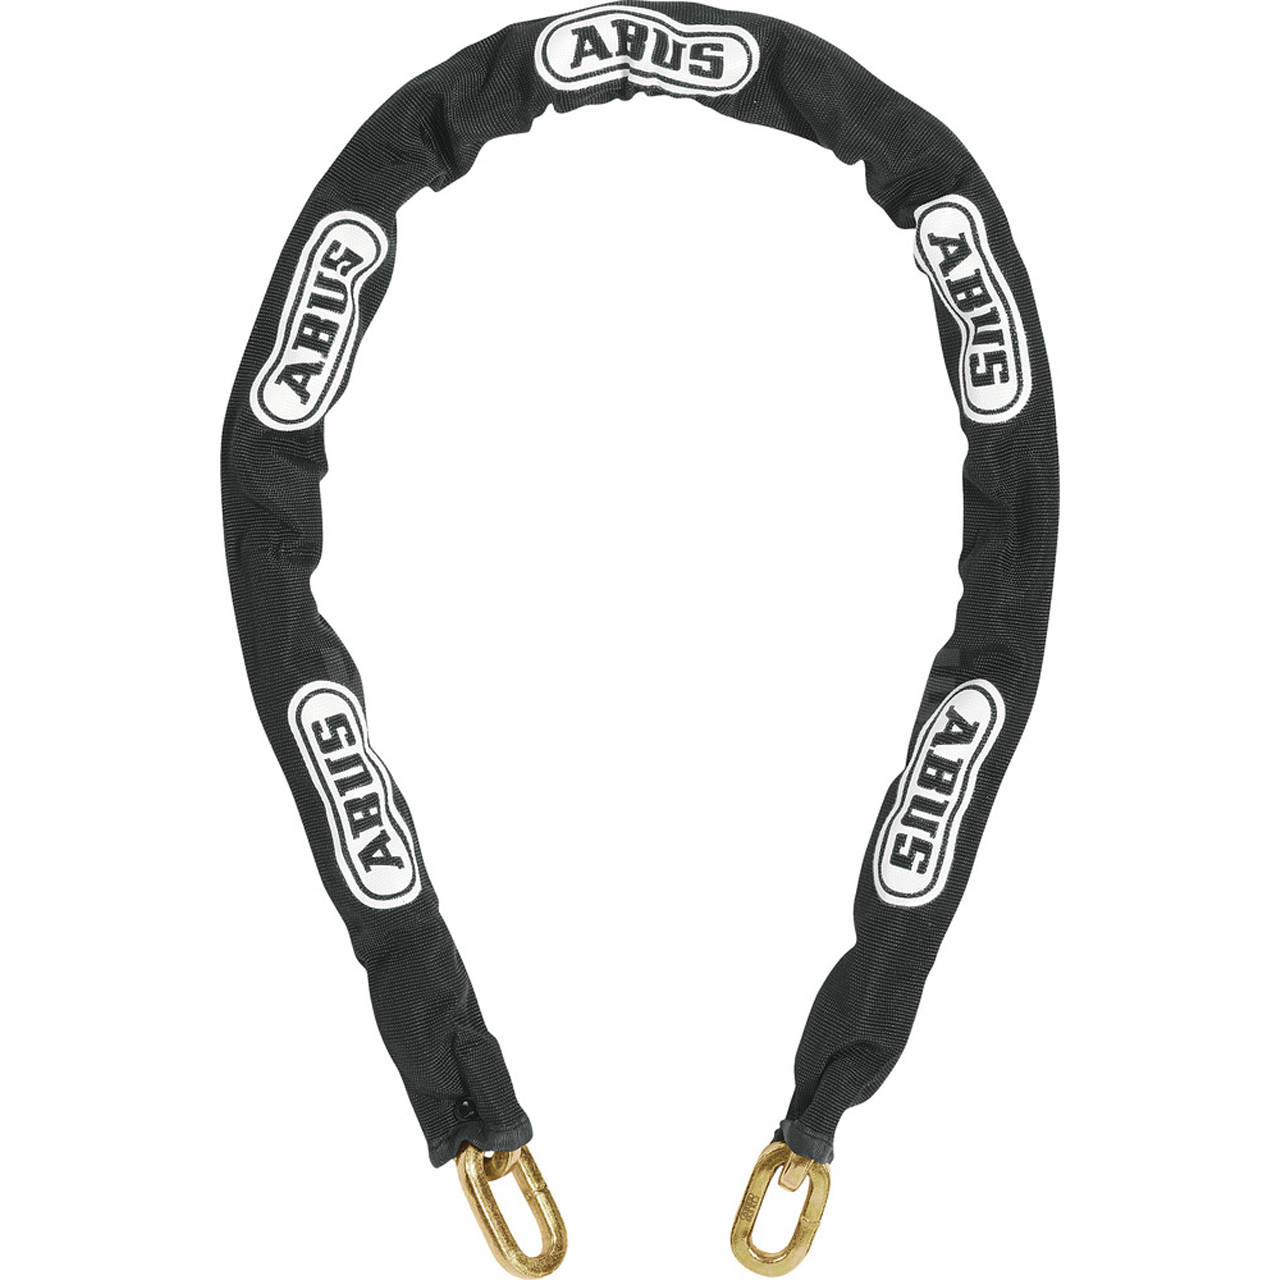 ABUS 8KS 8mm Square Link Security Chain